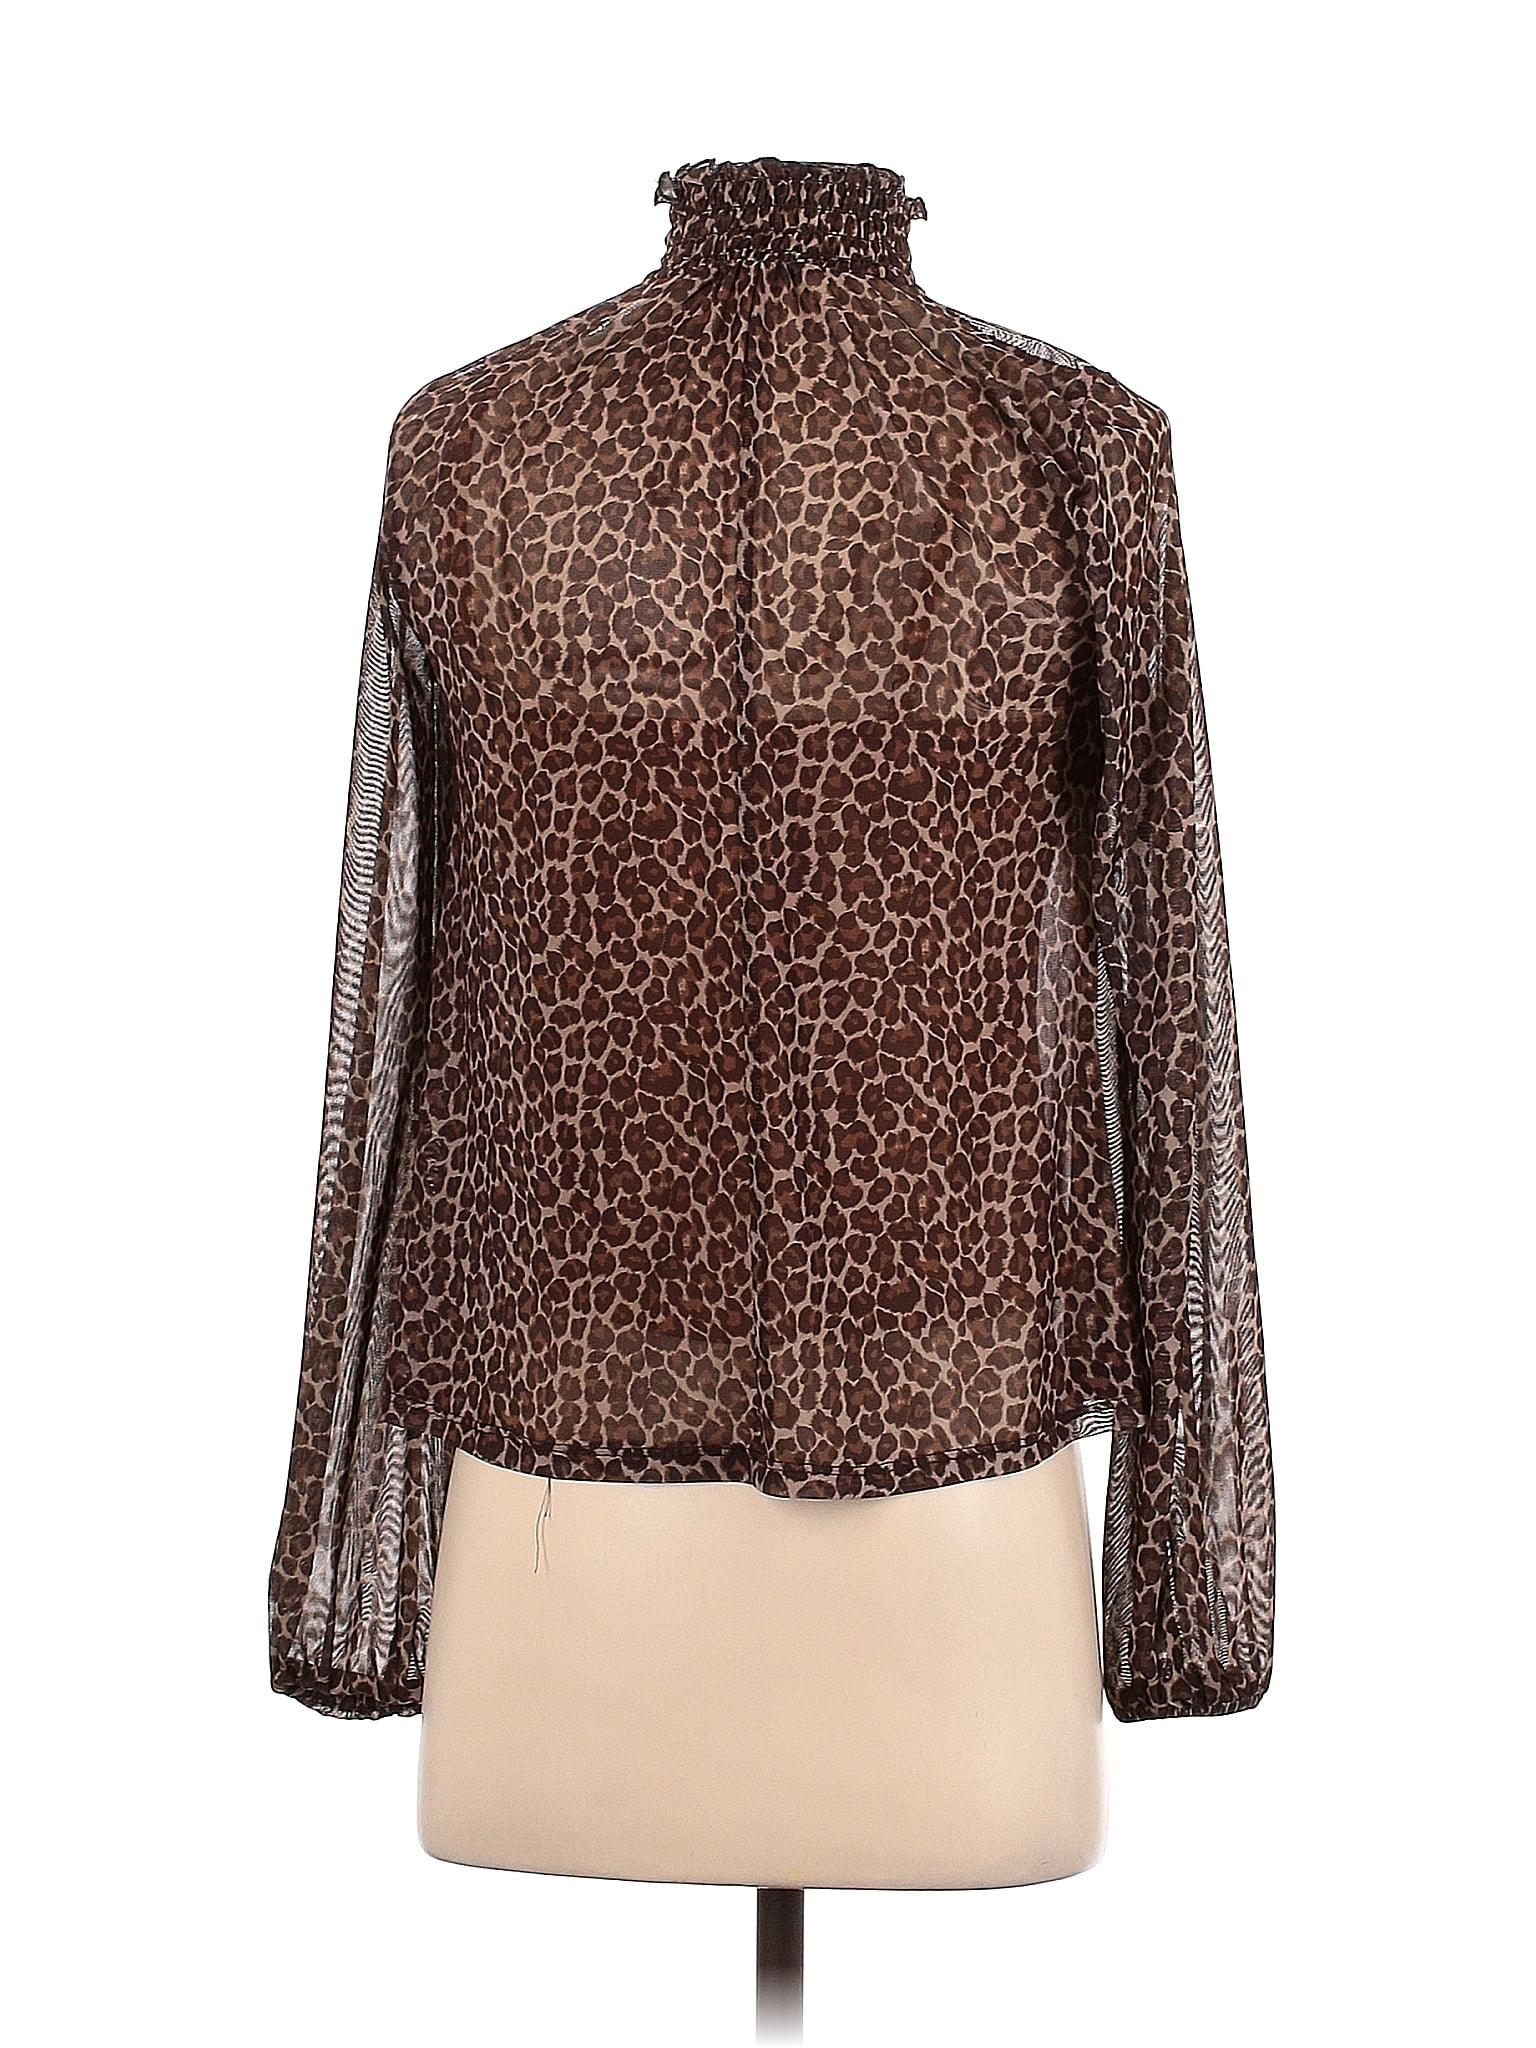 Wild Fable Brown Long Sleeve Blouse Size XS - 46% off